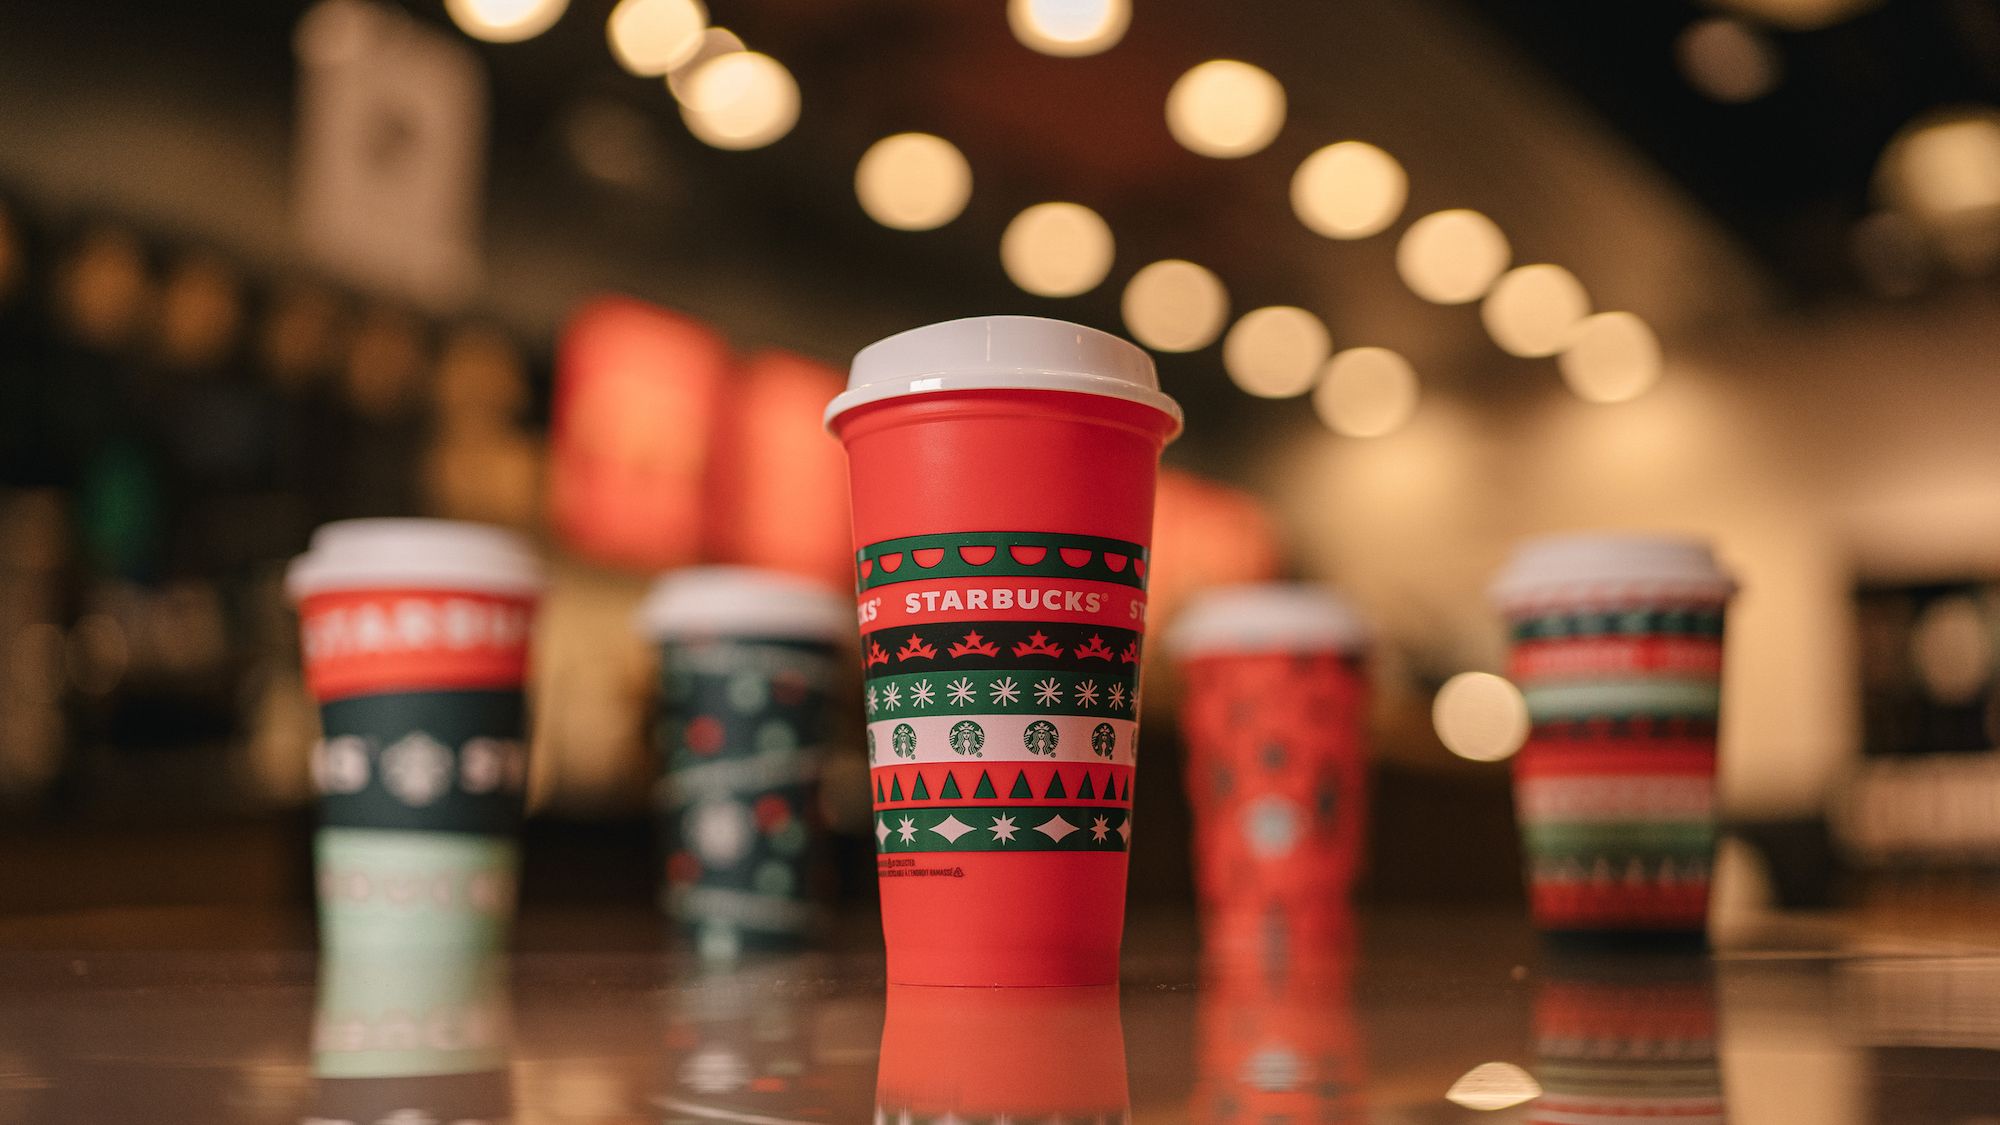 https://hips.hearstapps.com/hmg-prod/images/starbucks-holiday-cups-with-collectible-cup-jpg-1604521672.jpg?crop=1xw:0.8439609902475619xh;center,top